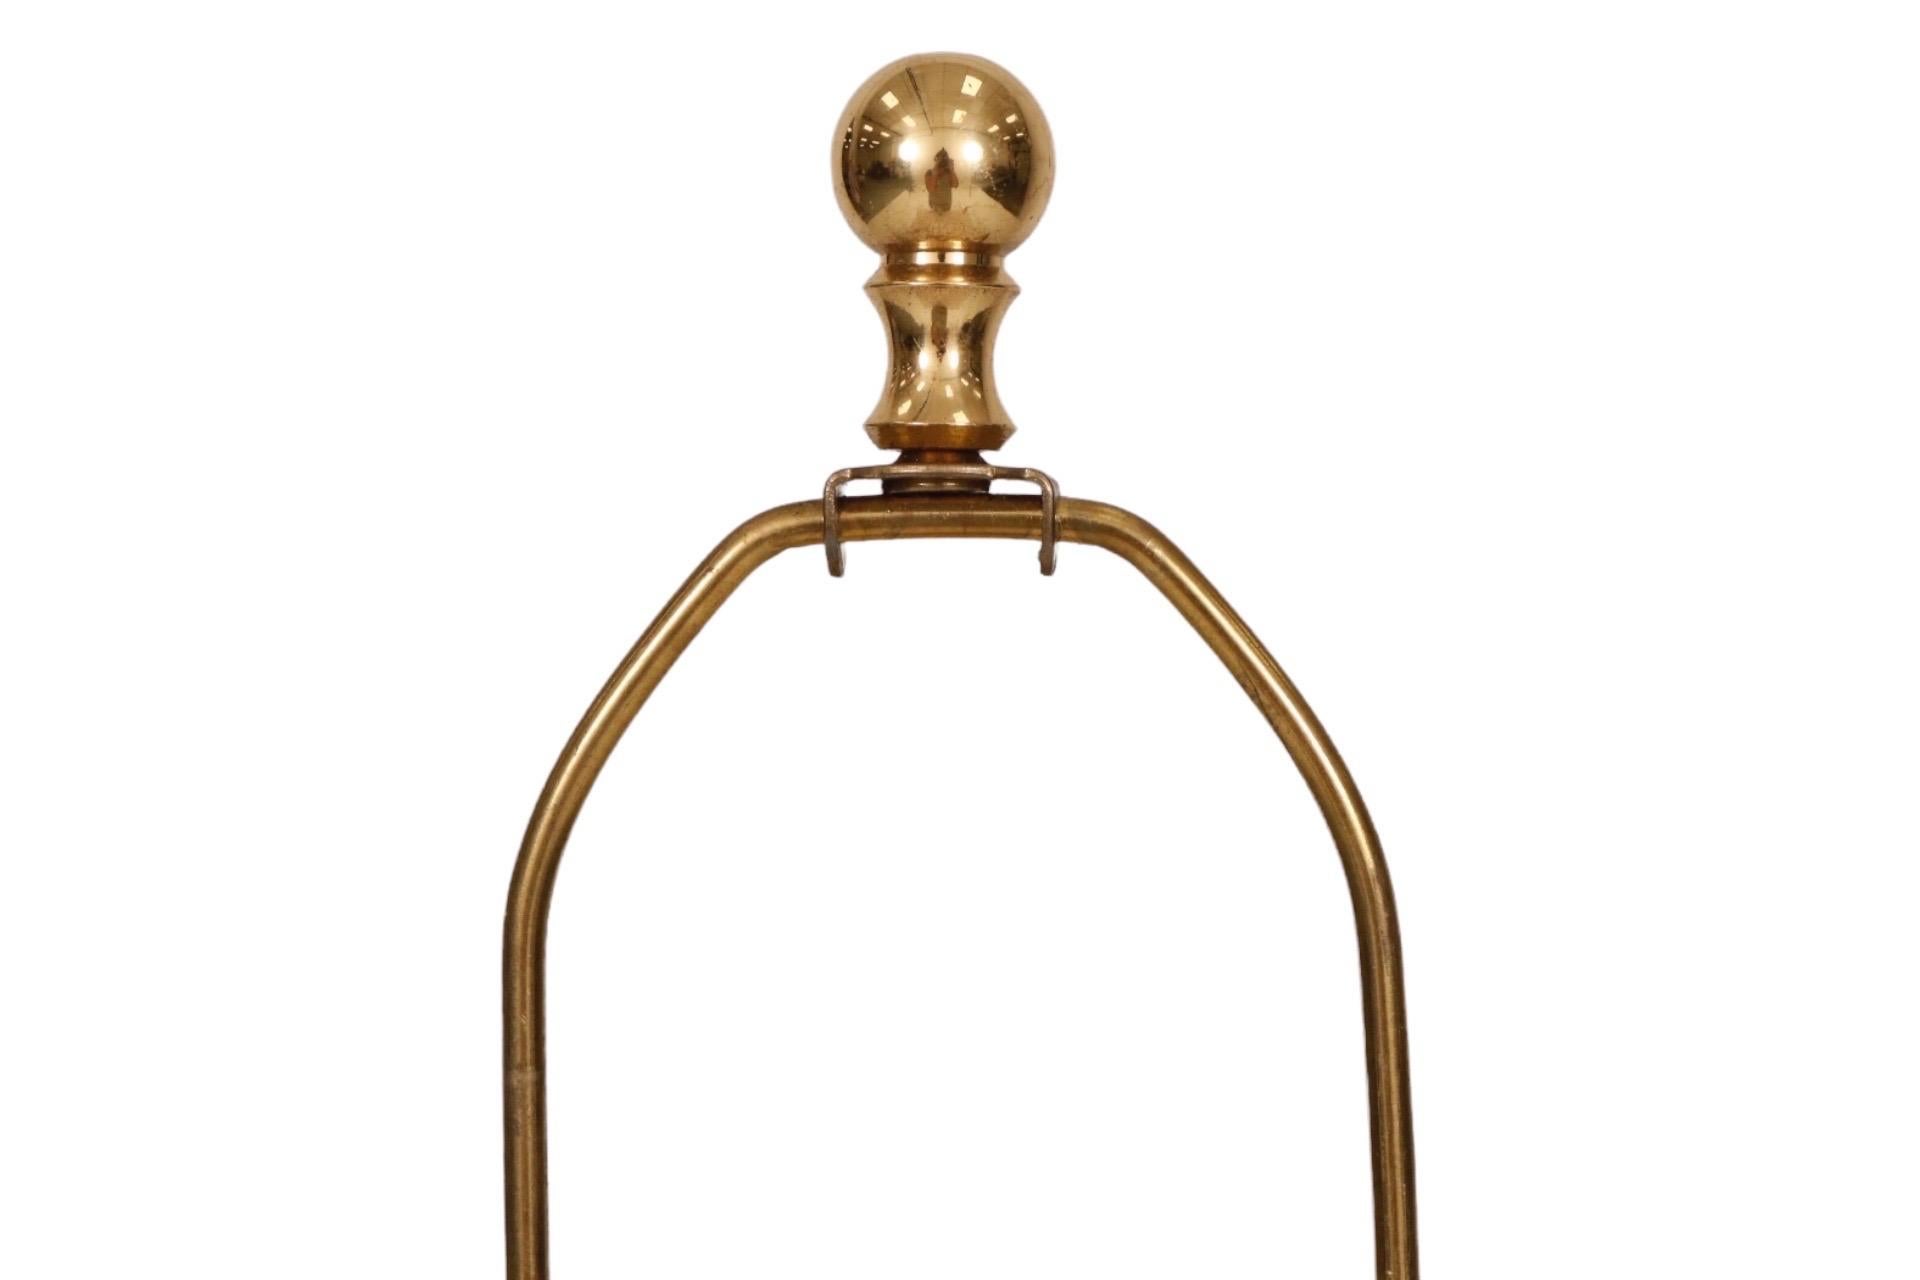 A tall ceramic table lamp in yellow. A simple arched base supports an hexagonal body and rounded neck. The harp is topped with a brass ball finial. Measures 21.5